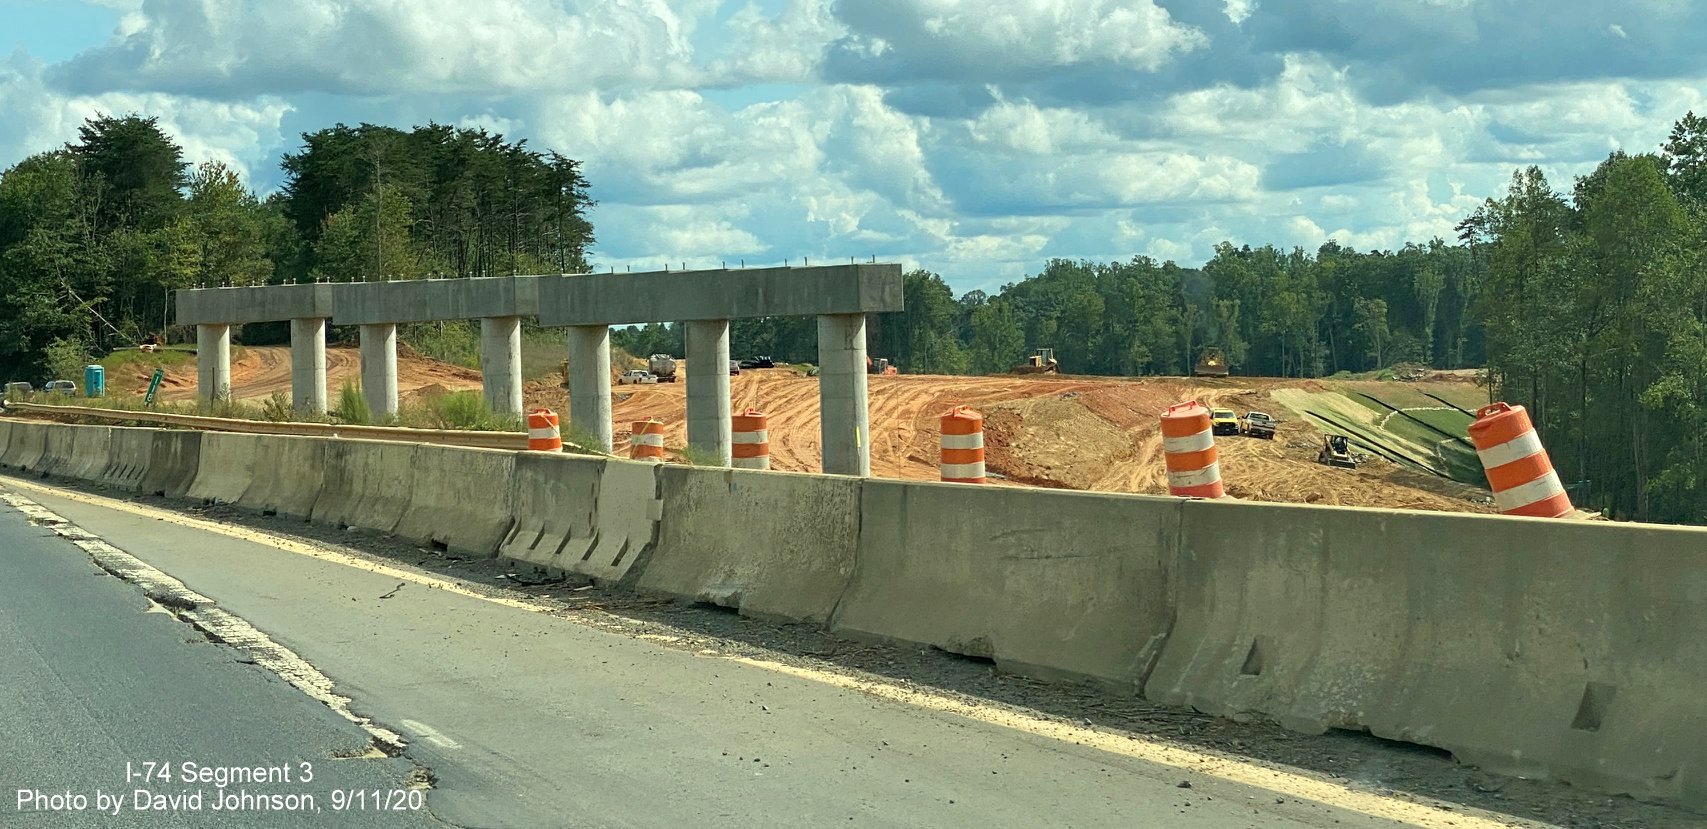 Image of bridge supports as seen from US 52 South as part of future I-74 Winston Salem Northern Beltway interchange construction, by David Johnson September 2020